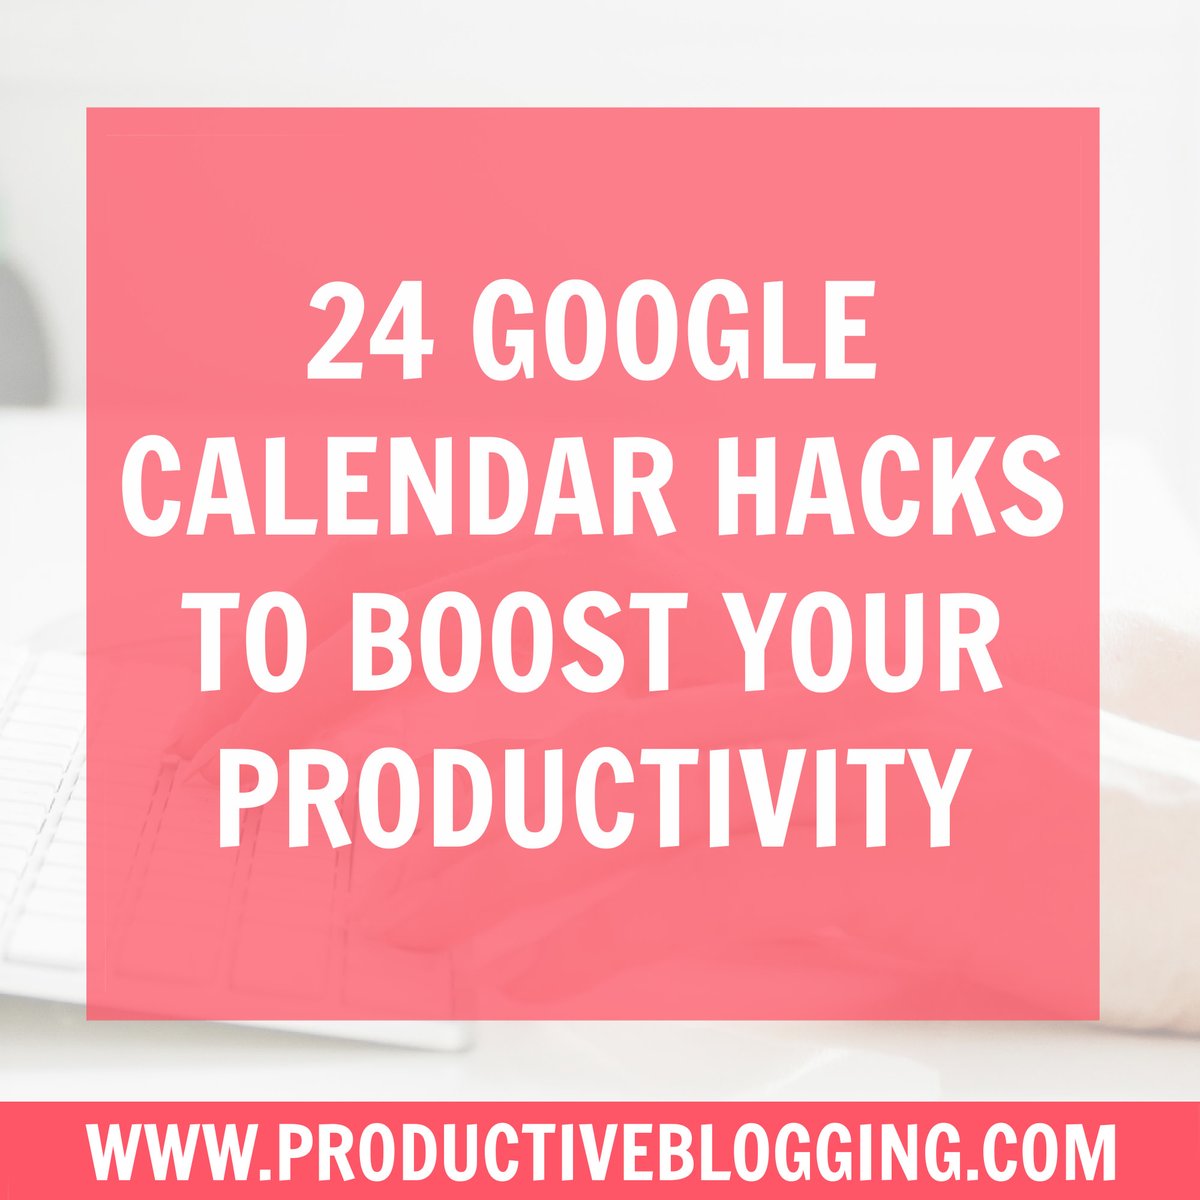 Google Calendar is one of the best productivity tools out there… But are you taking full advantage of all the features? If you are like most people, then probably not! bit.ly/3tkyCSN

#GoogleCalendar #GoogleCalendarHacks #ProductiveBlogging